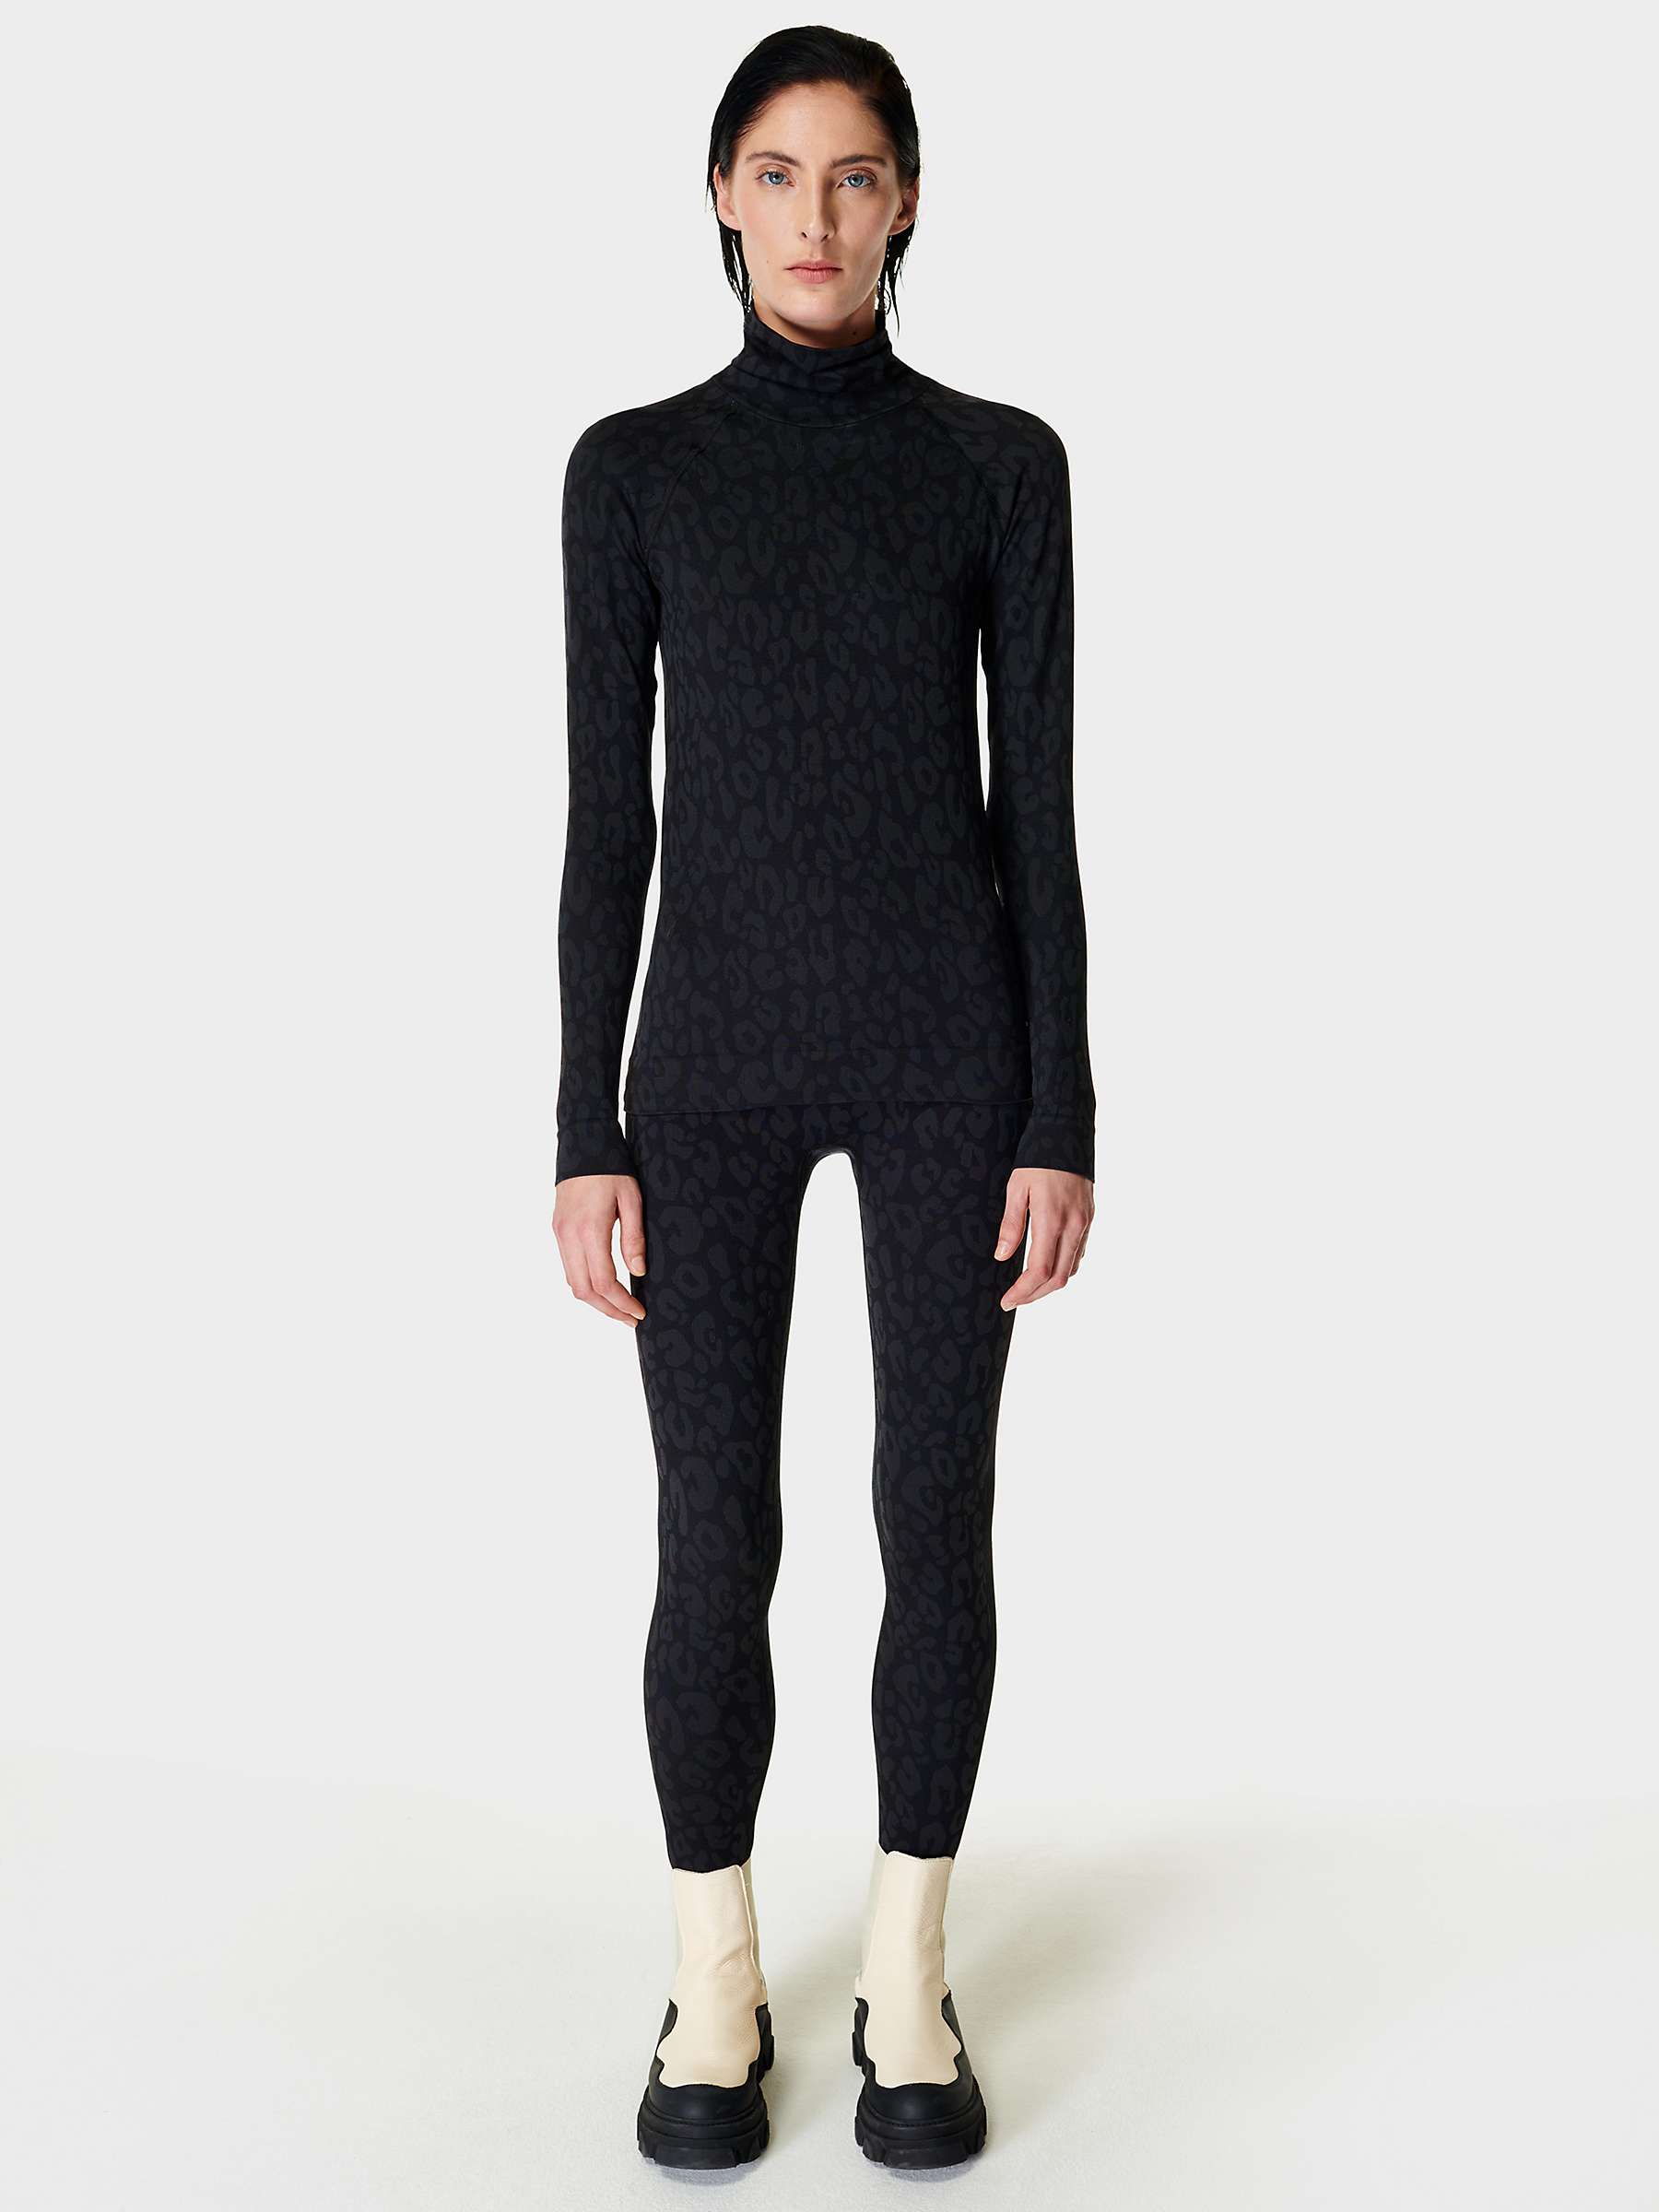 Buy Sweaty Betty High Neck Leopard Jacquard Base Layer Top, Black Online at johnlewis.com